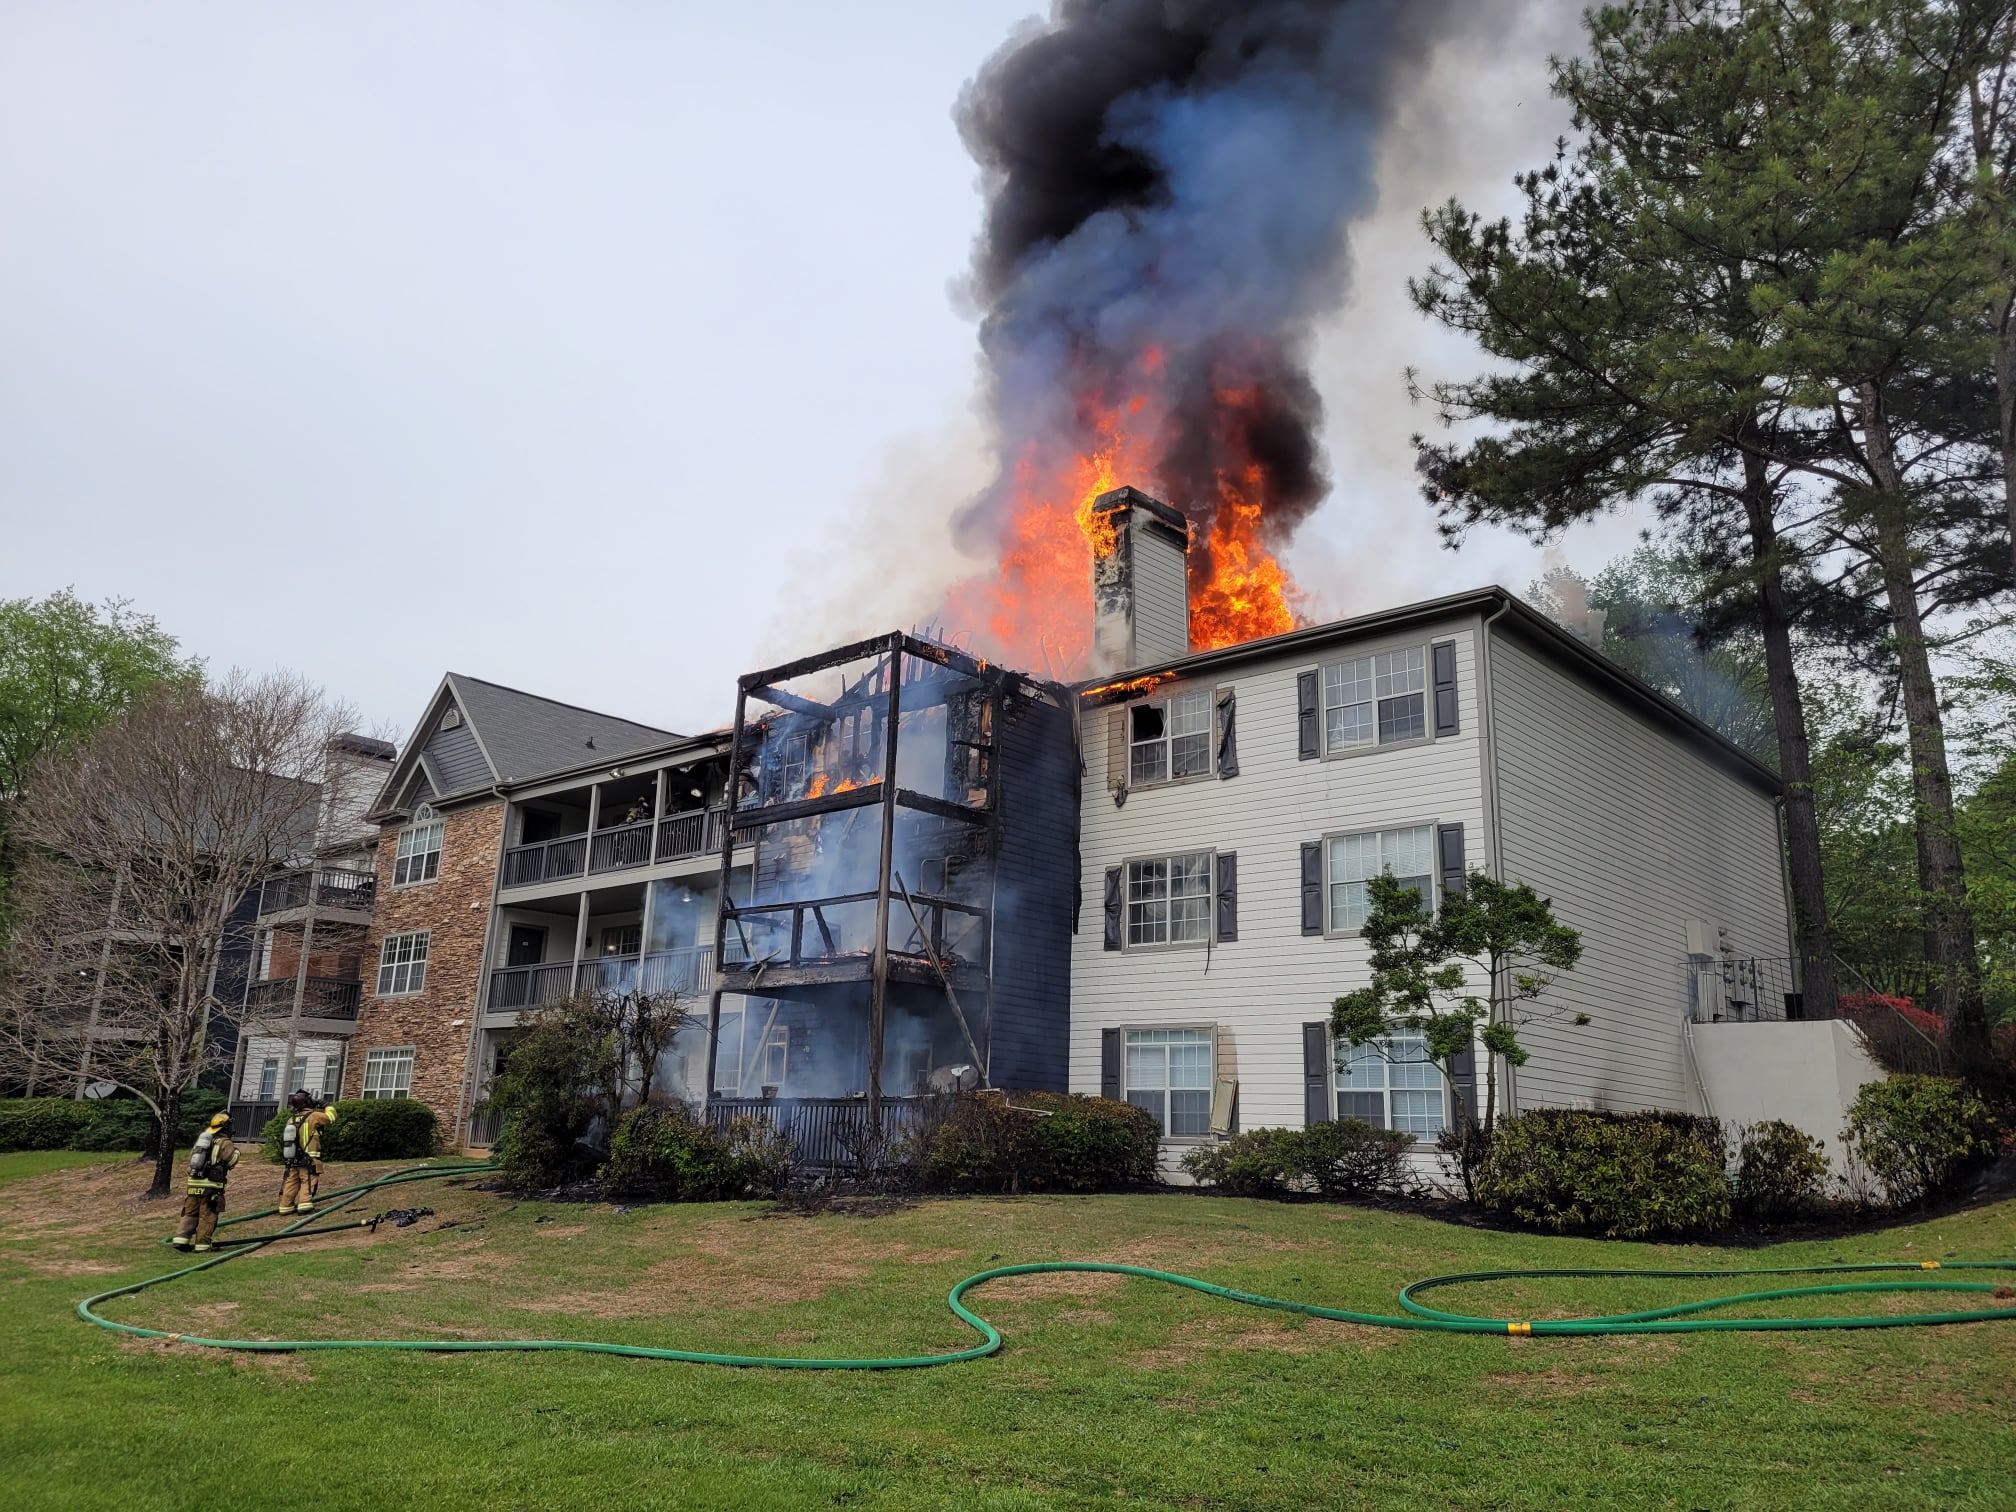 40 people without homes after massive Duluth apartment fire